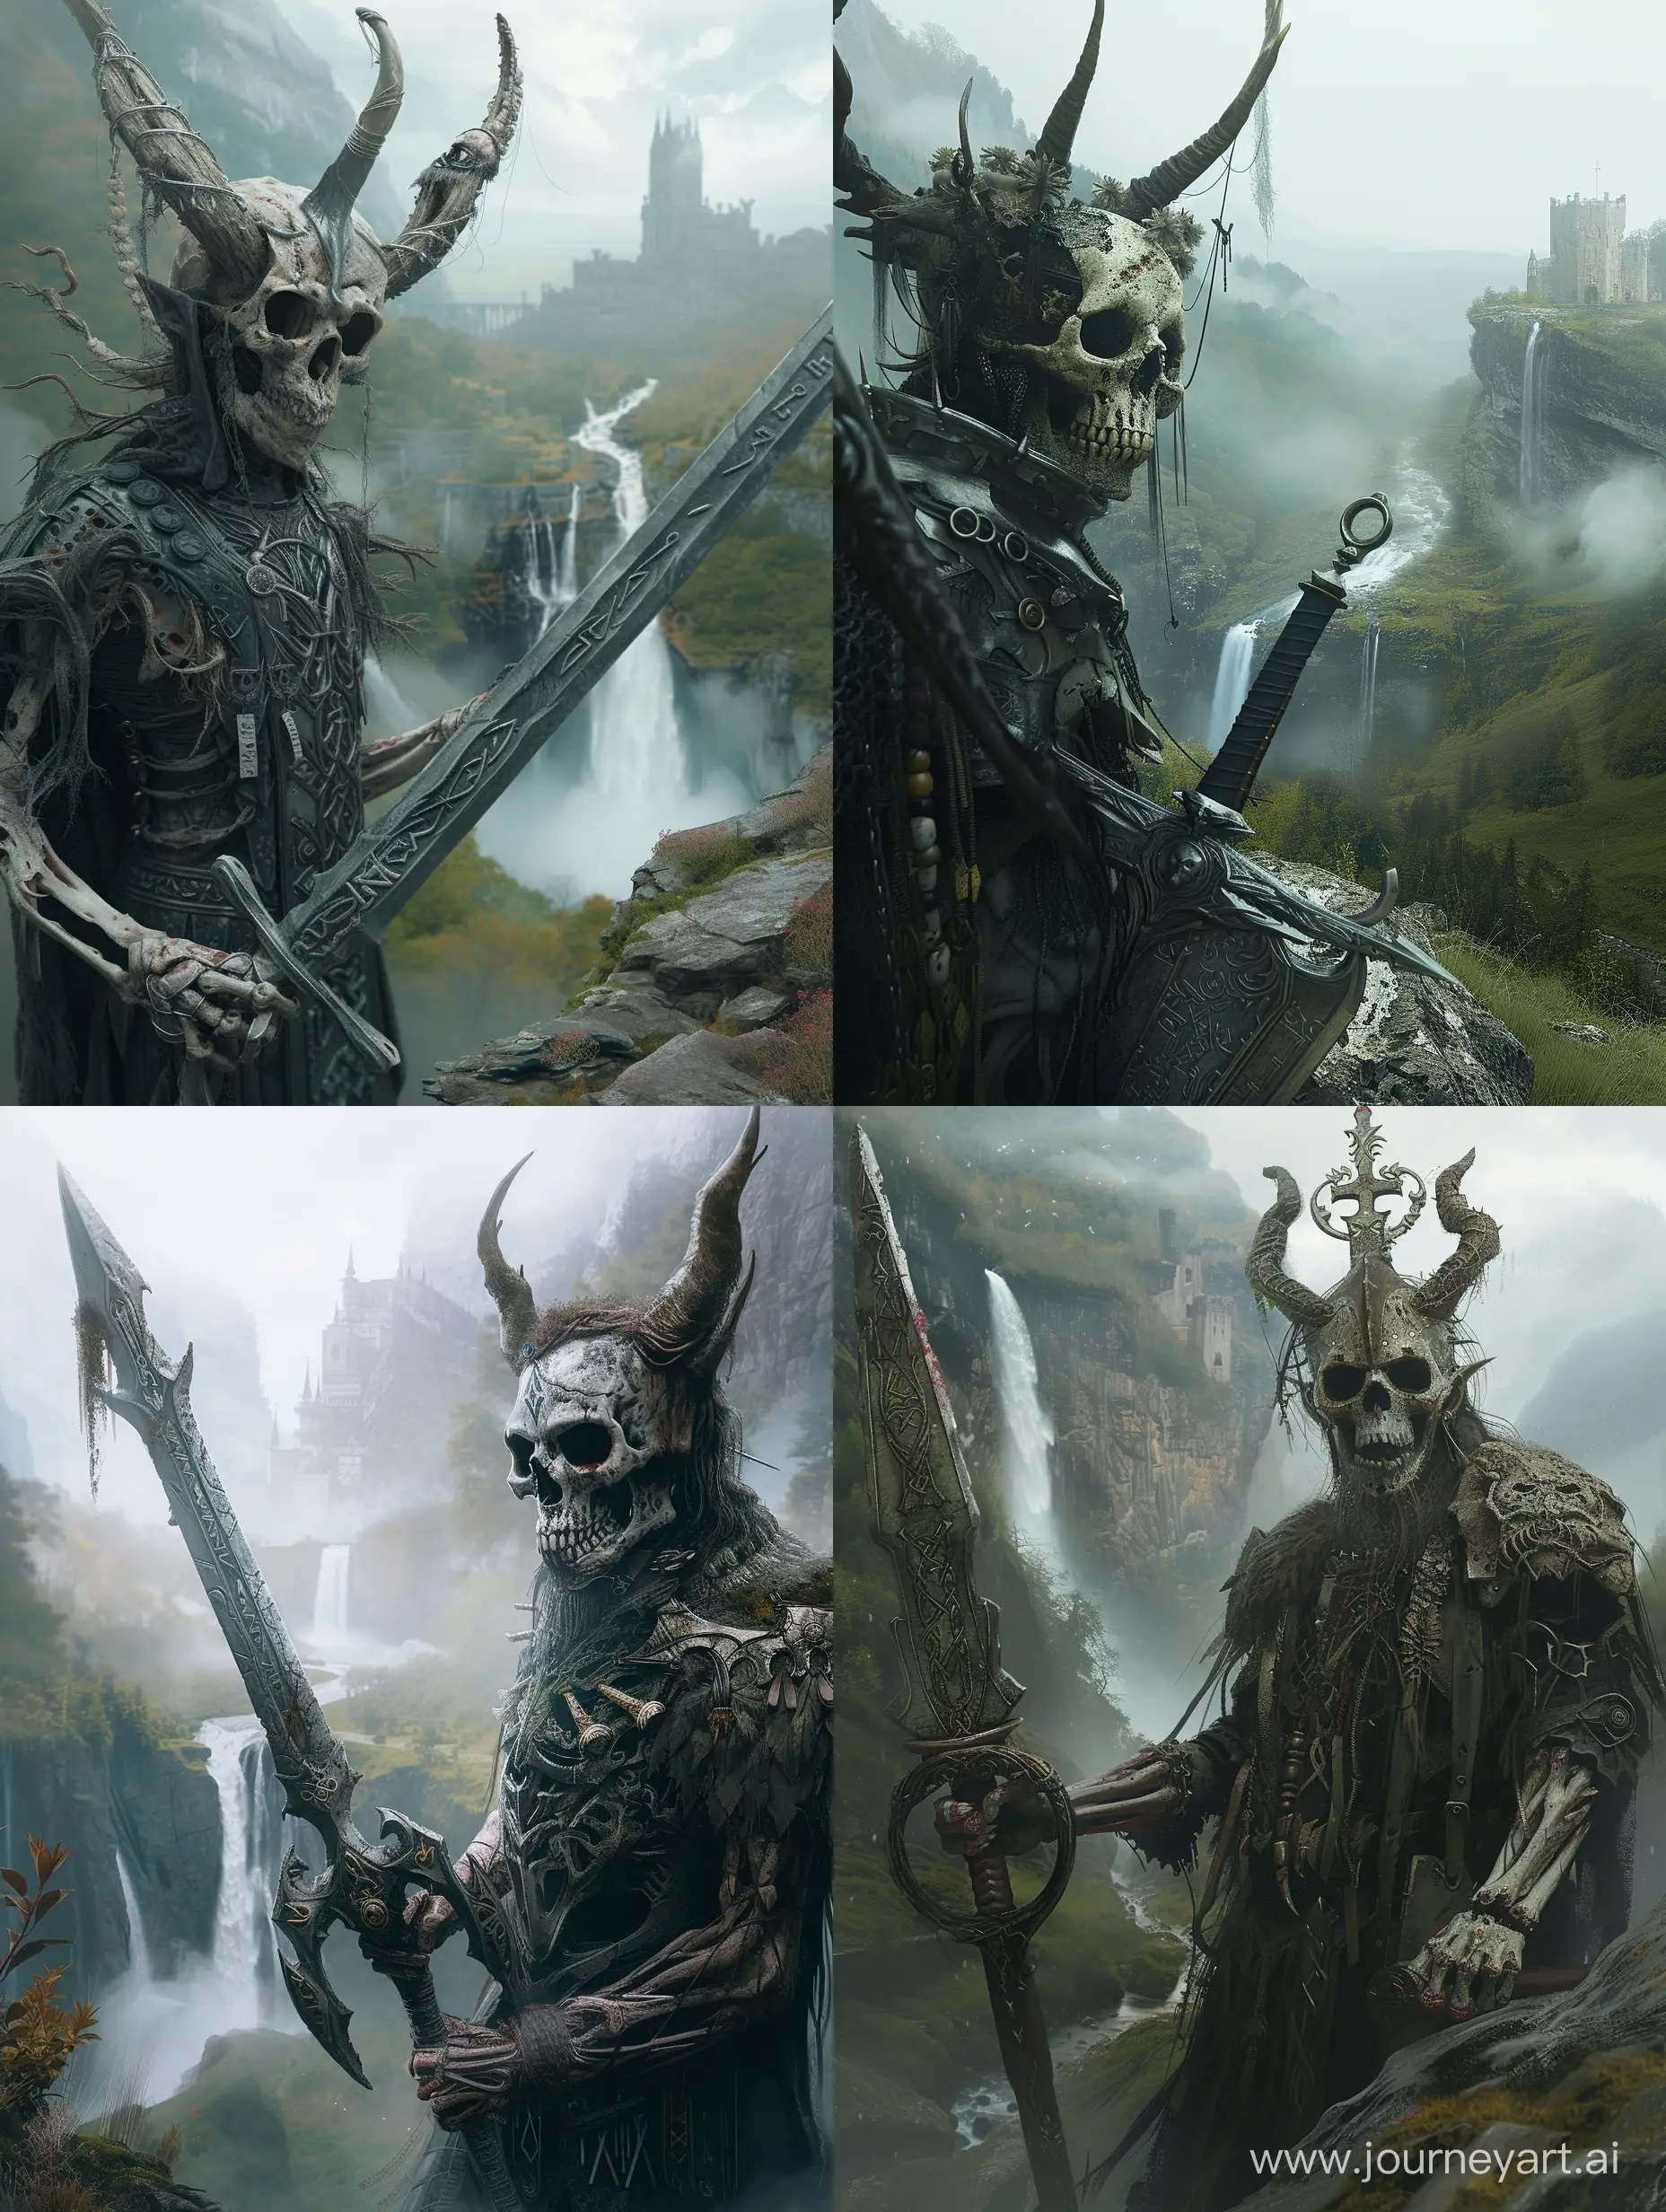 character design of the Elder God Slayer with skull for face and elaborate horns wielding an ancient blade Mist envelops the valley waterfall and castle visible in the distant haze Created Using gothic elements sinister aura detailed bone texture weapon with runes atmospheric perspective environmental storytelling high fantasy art moody lighting 